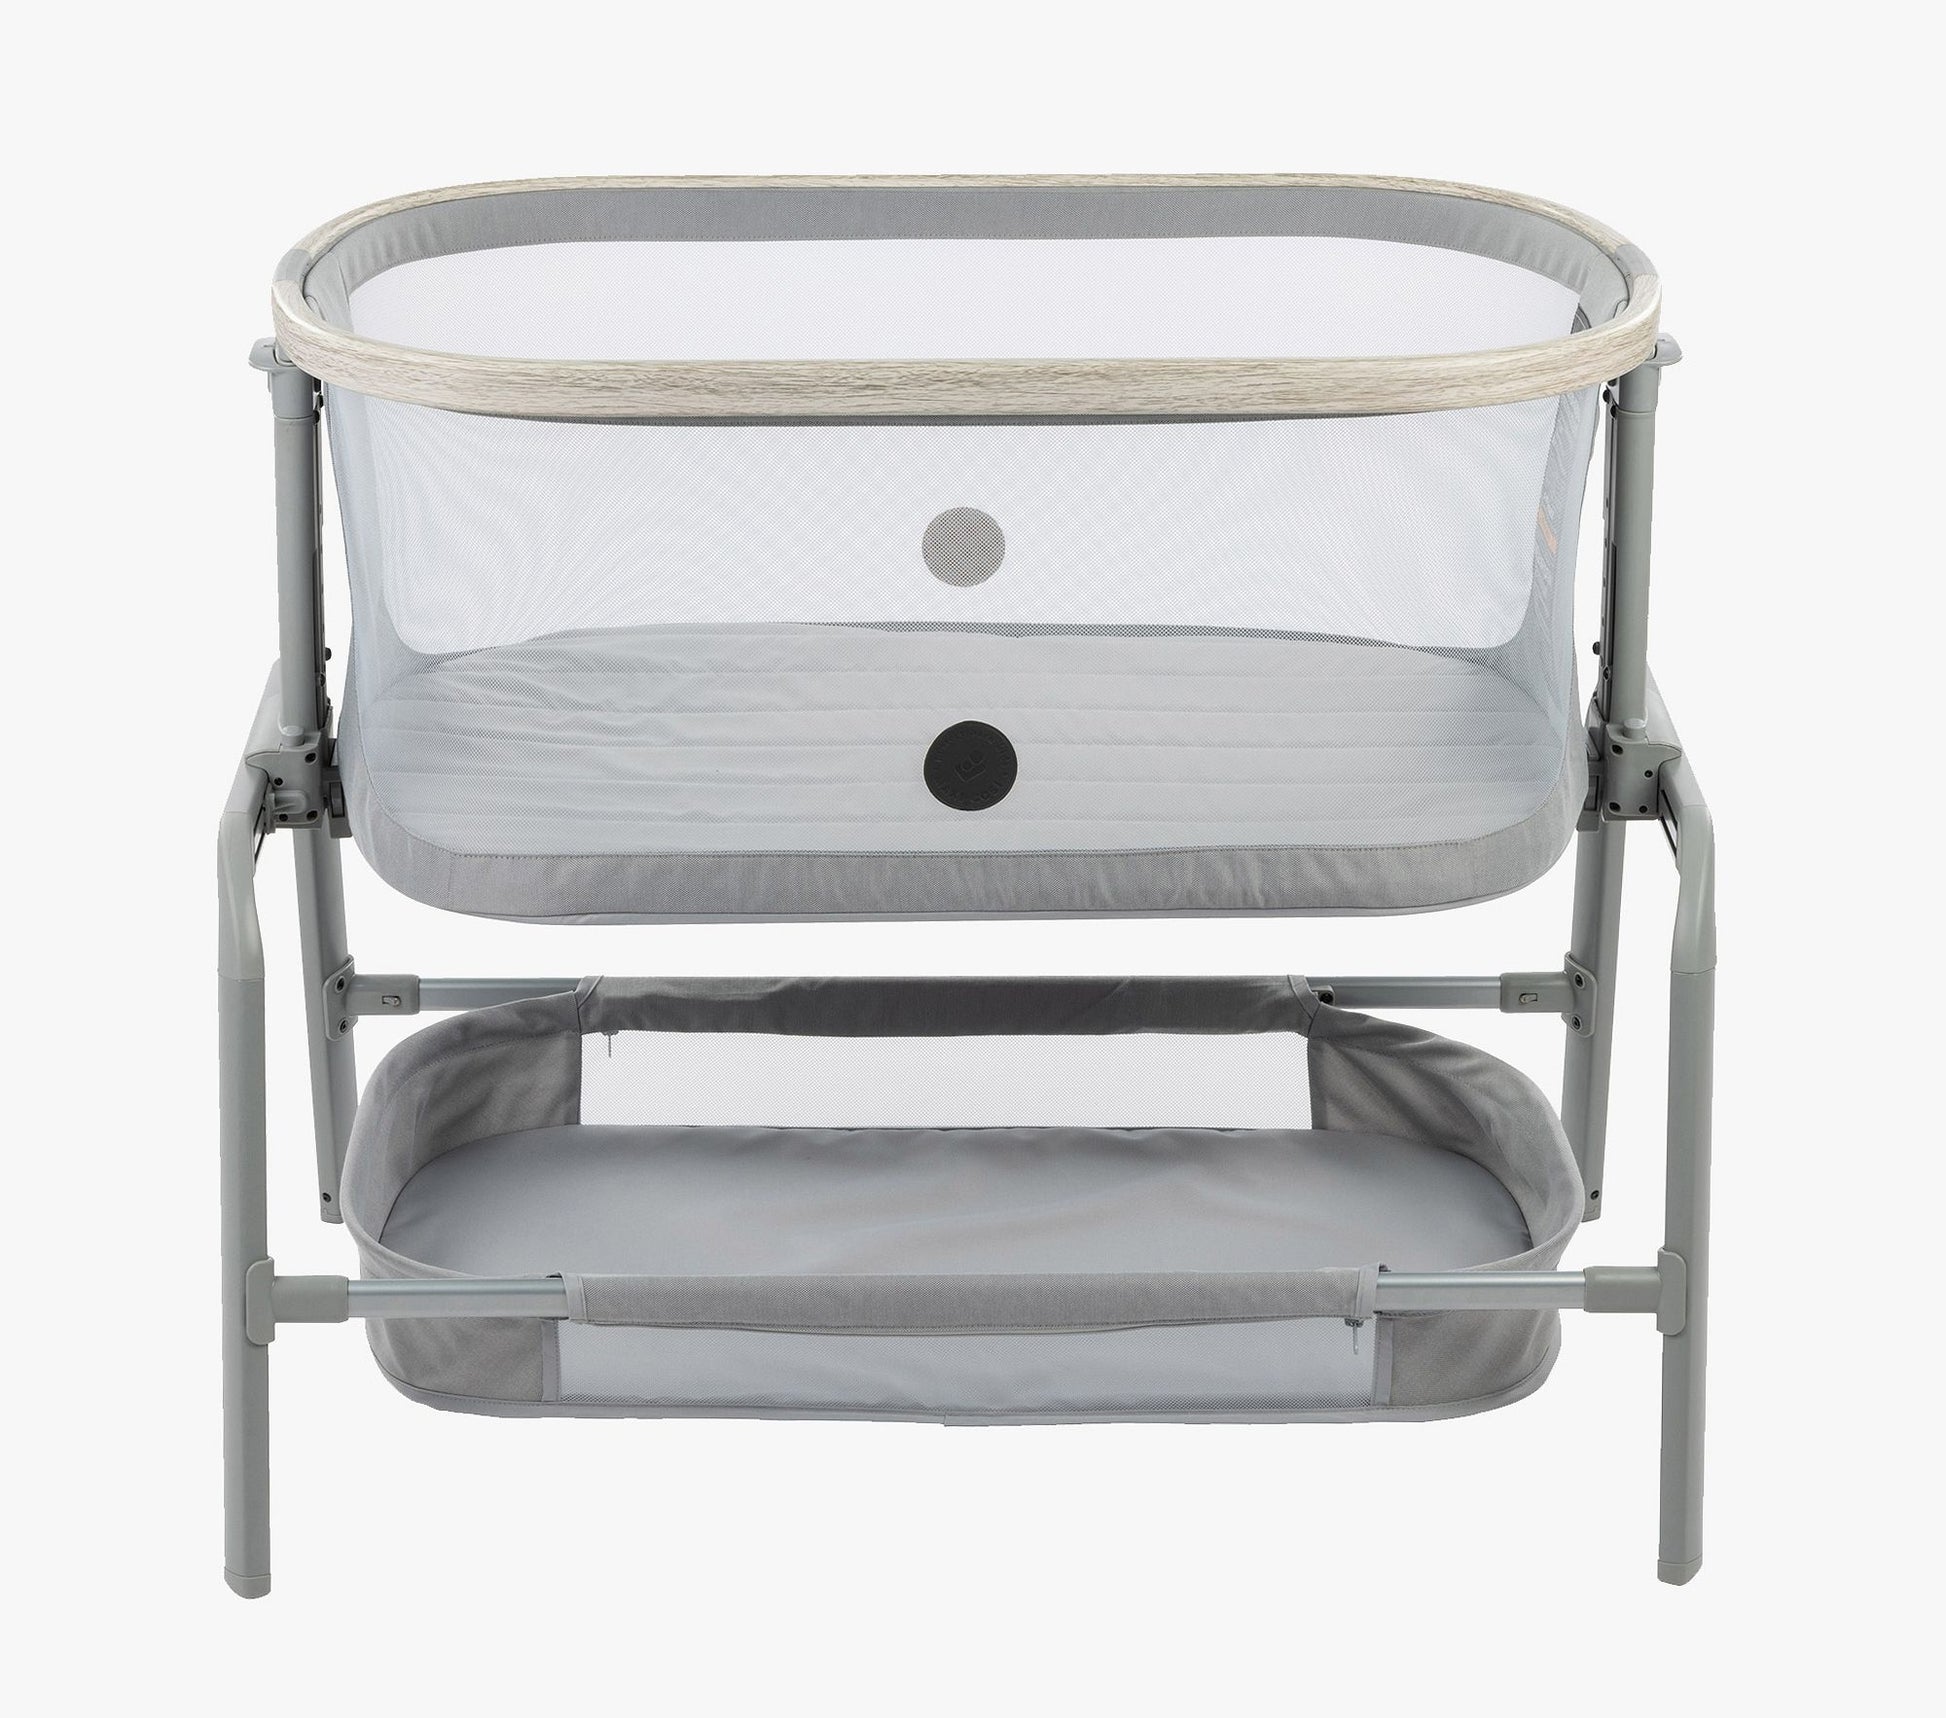 A side view of the Maxi-Cosi® Iora newborn Bassinet, showcasing its sleek design with breathable mesh sides and soft gray fabric. The bassinet includes a convenient lower storage shelf for easy access to baby essentials.